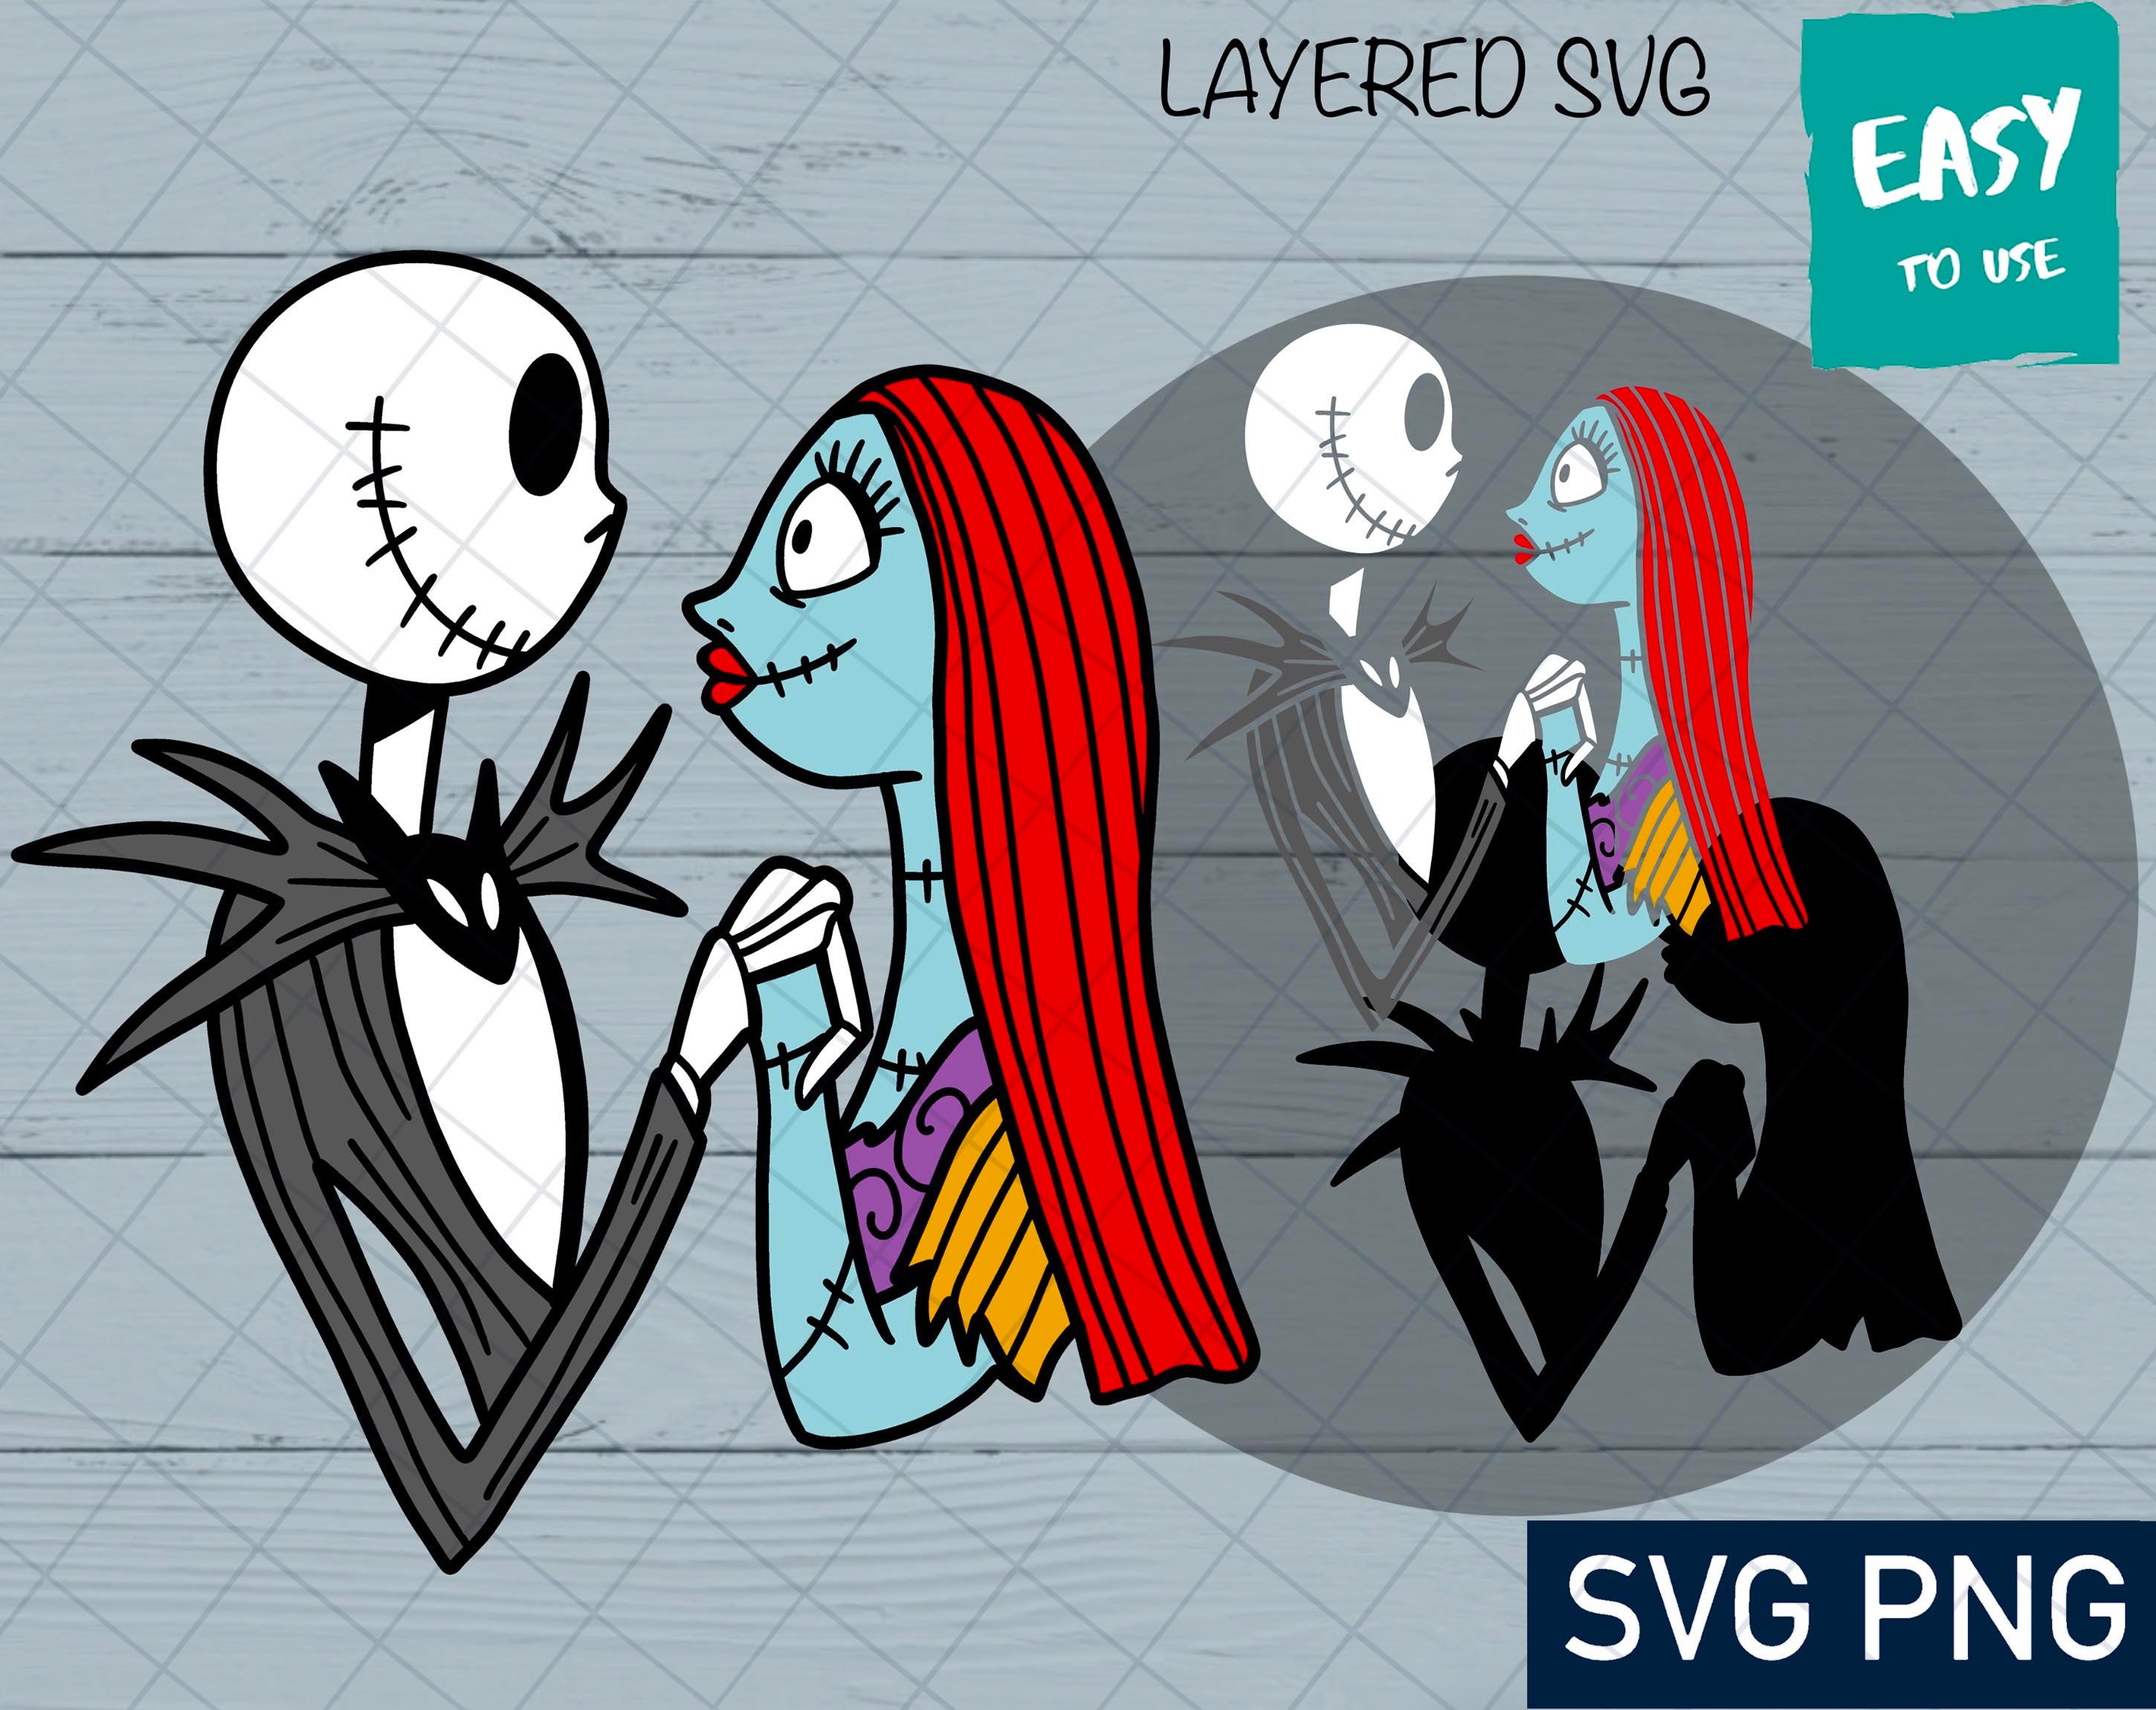 Jack and Sally SVG, Cricut svg, Clipart, Layered SVG, Files for Cricut, Valentine day, Cut files, Silhouette, T Shirt svg png, Love svg